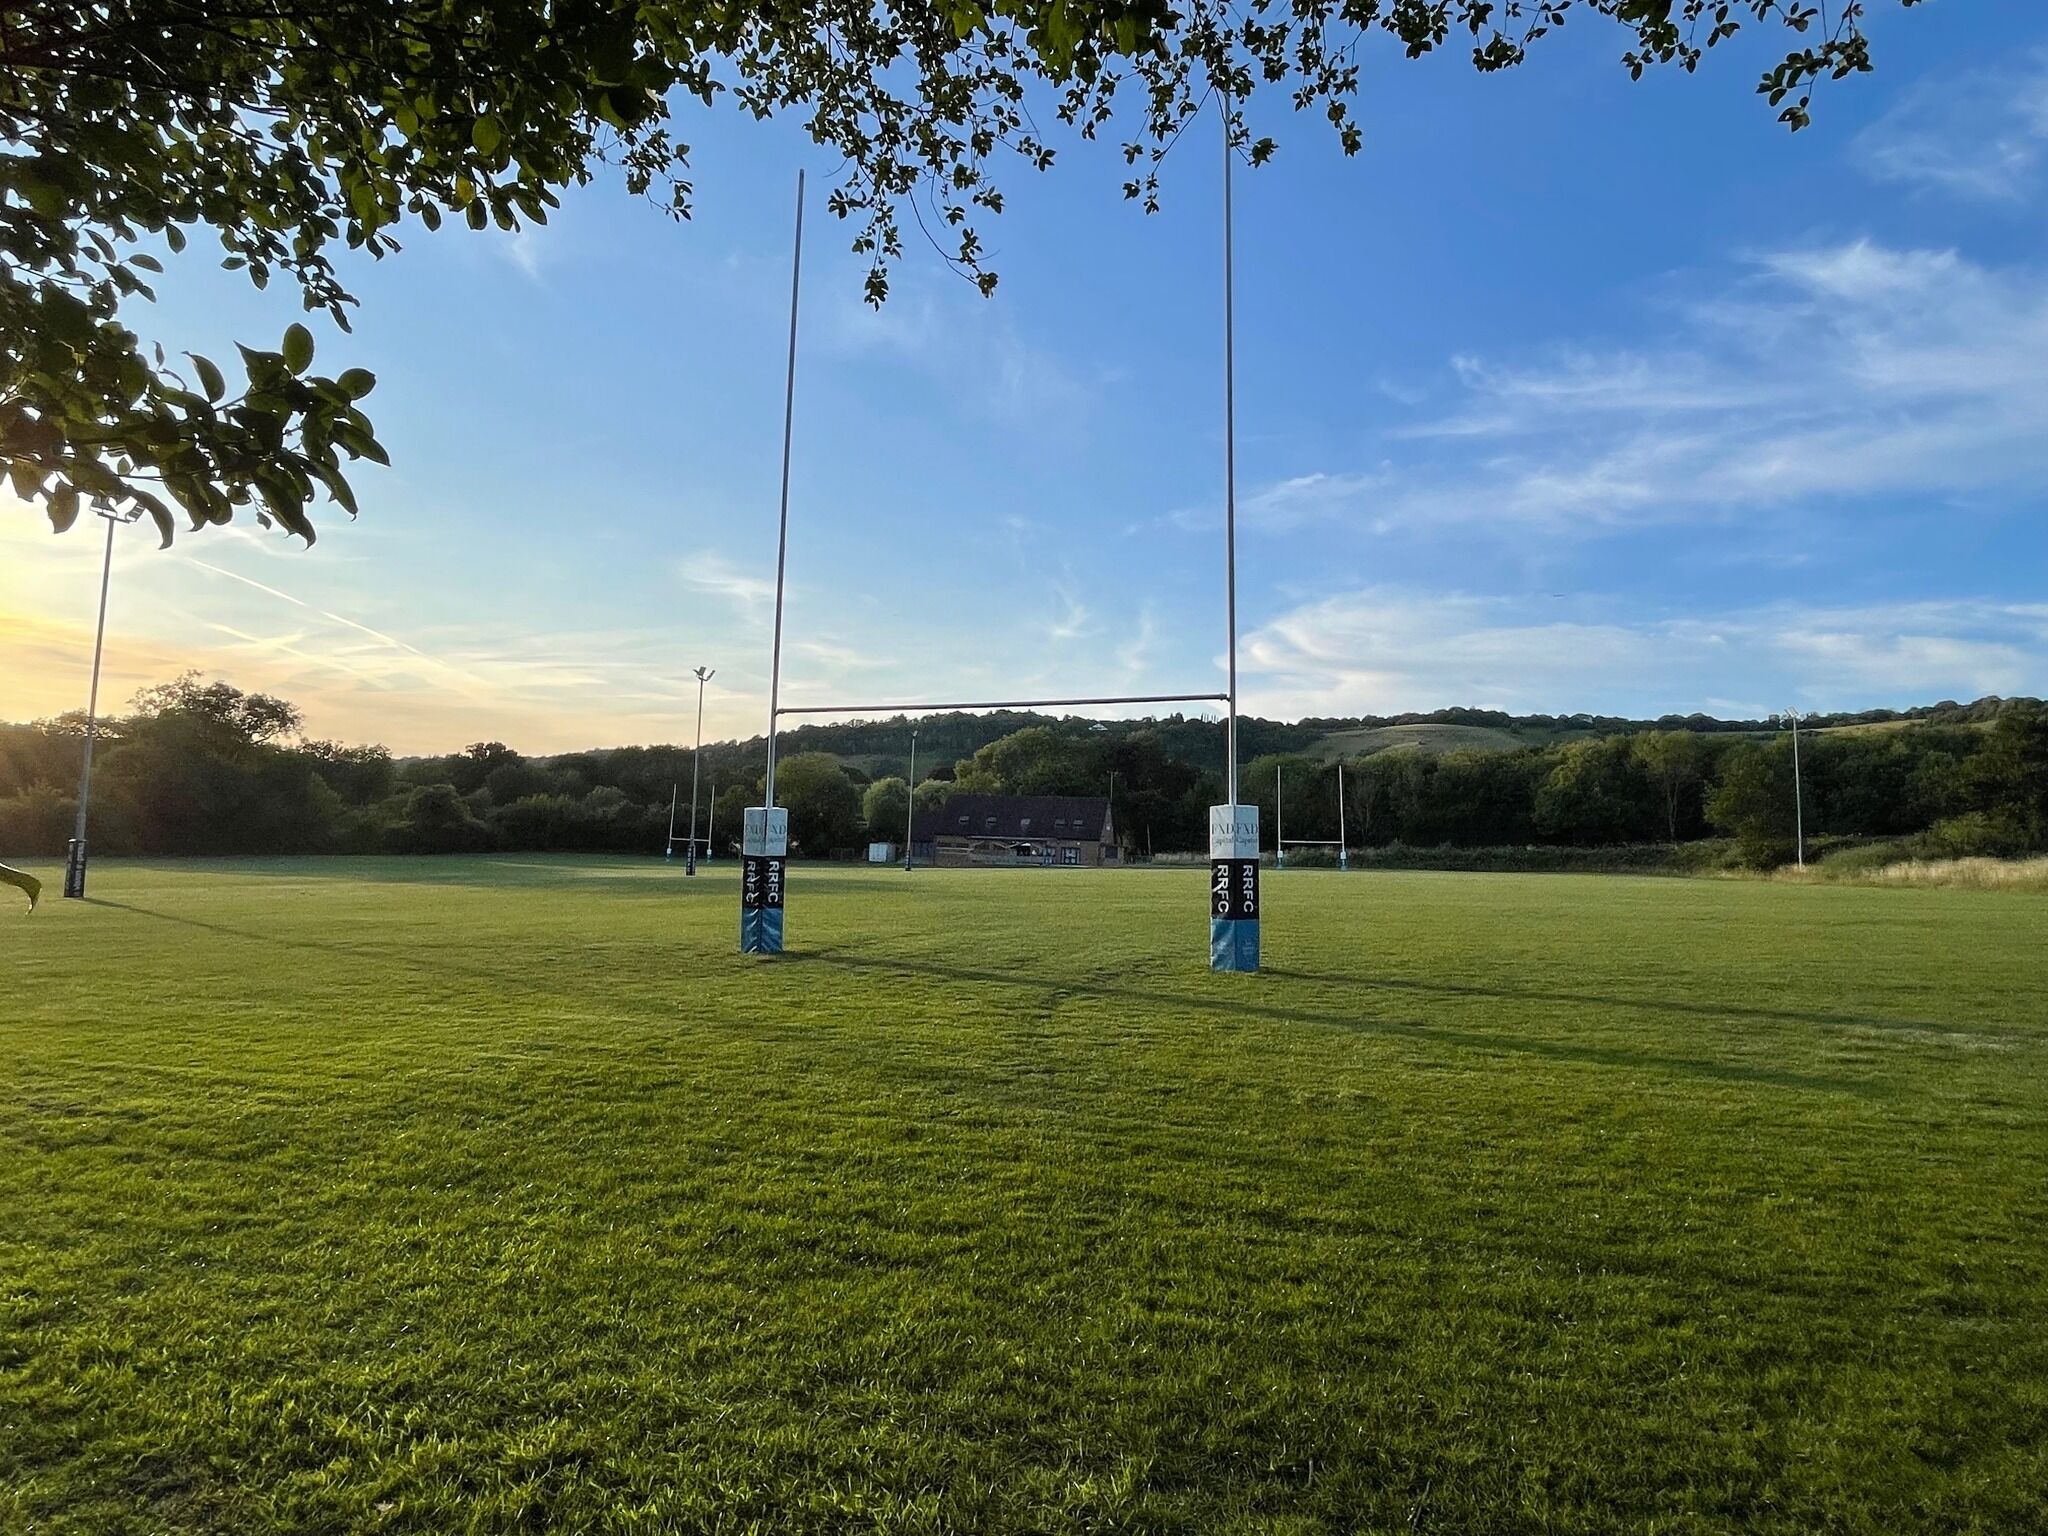 Reigate Rugby Club - our main birthday party venue